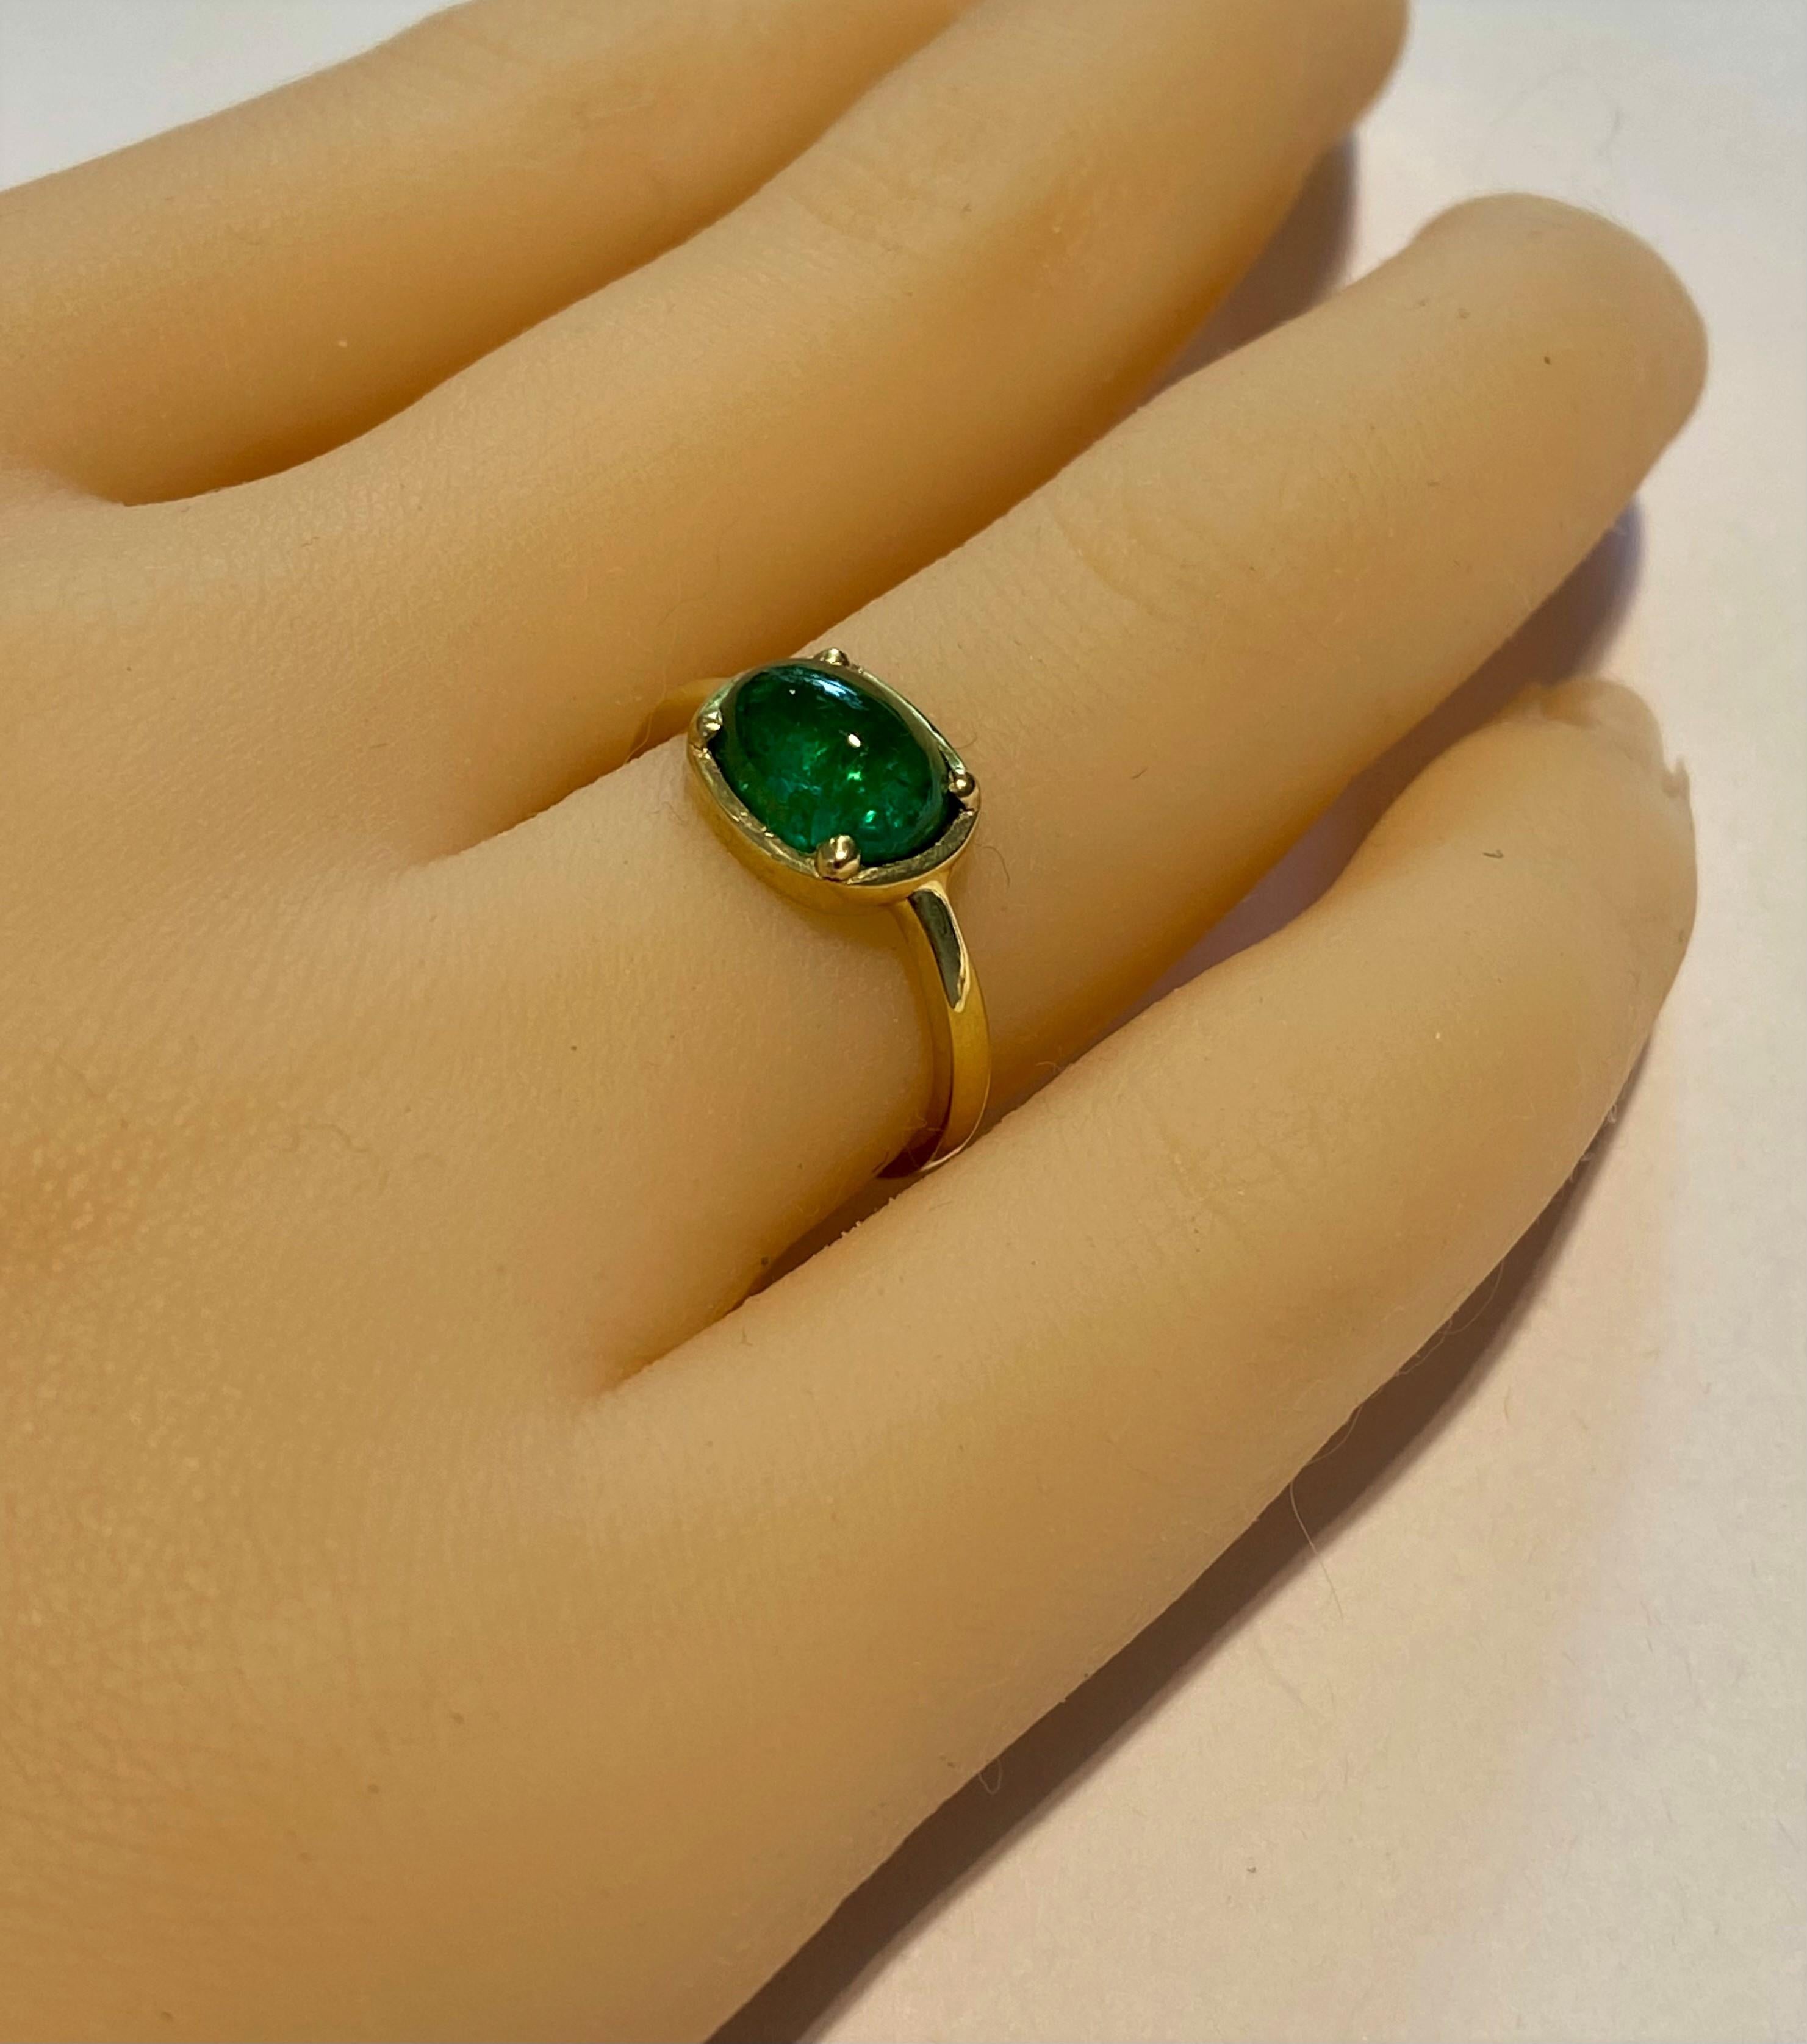 Women's Cabochon Emerald Gold Cocktail Ring Weighing 2.25 Carat